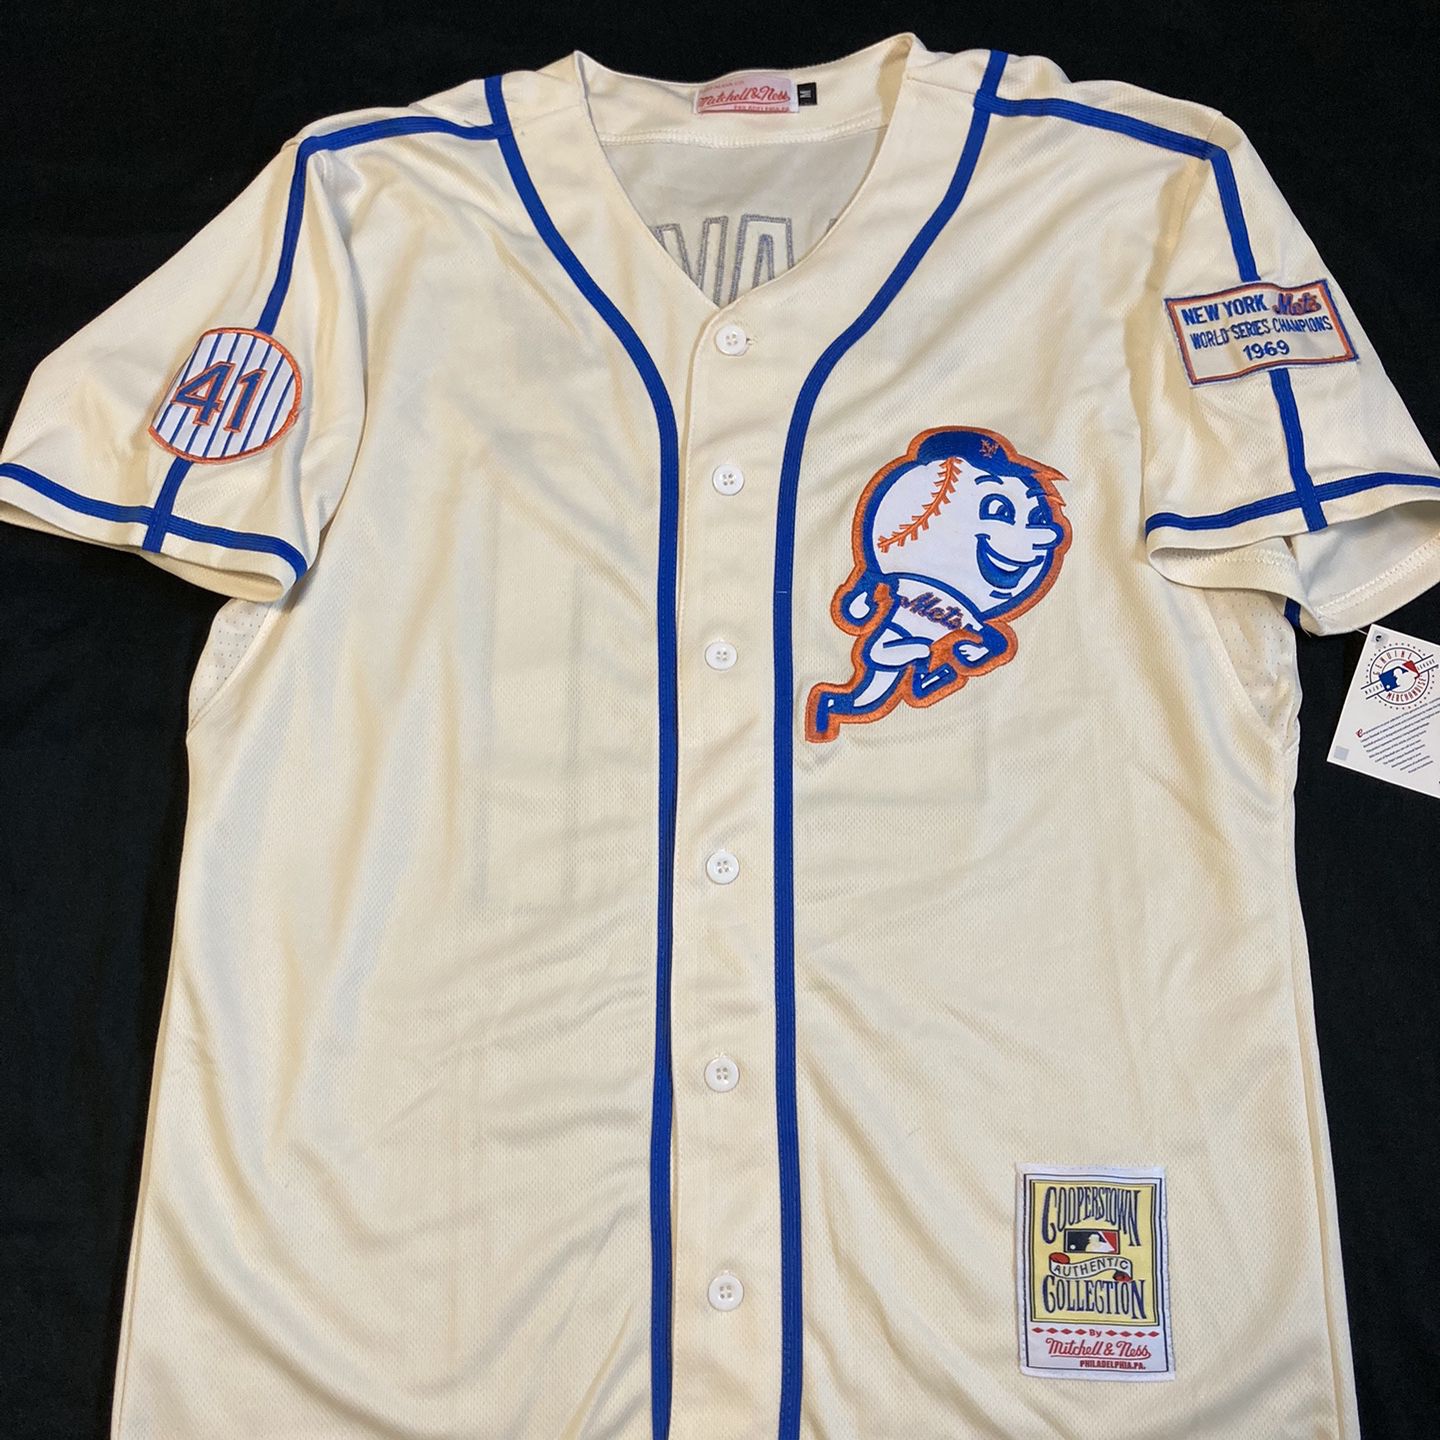 NY Mets Seaver '69 Jersey for Sale in Houston, TX - OfferUp